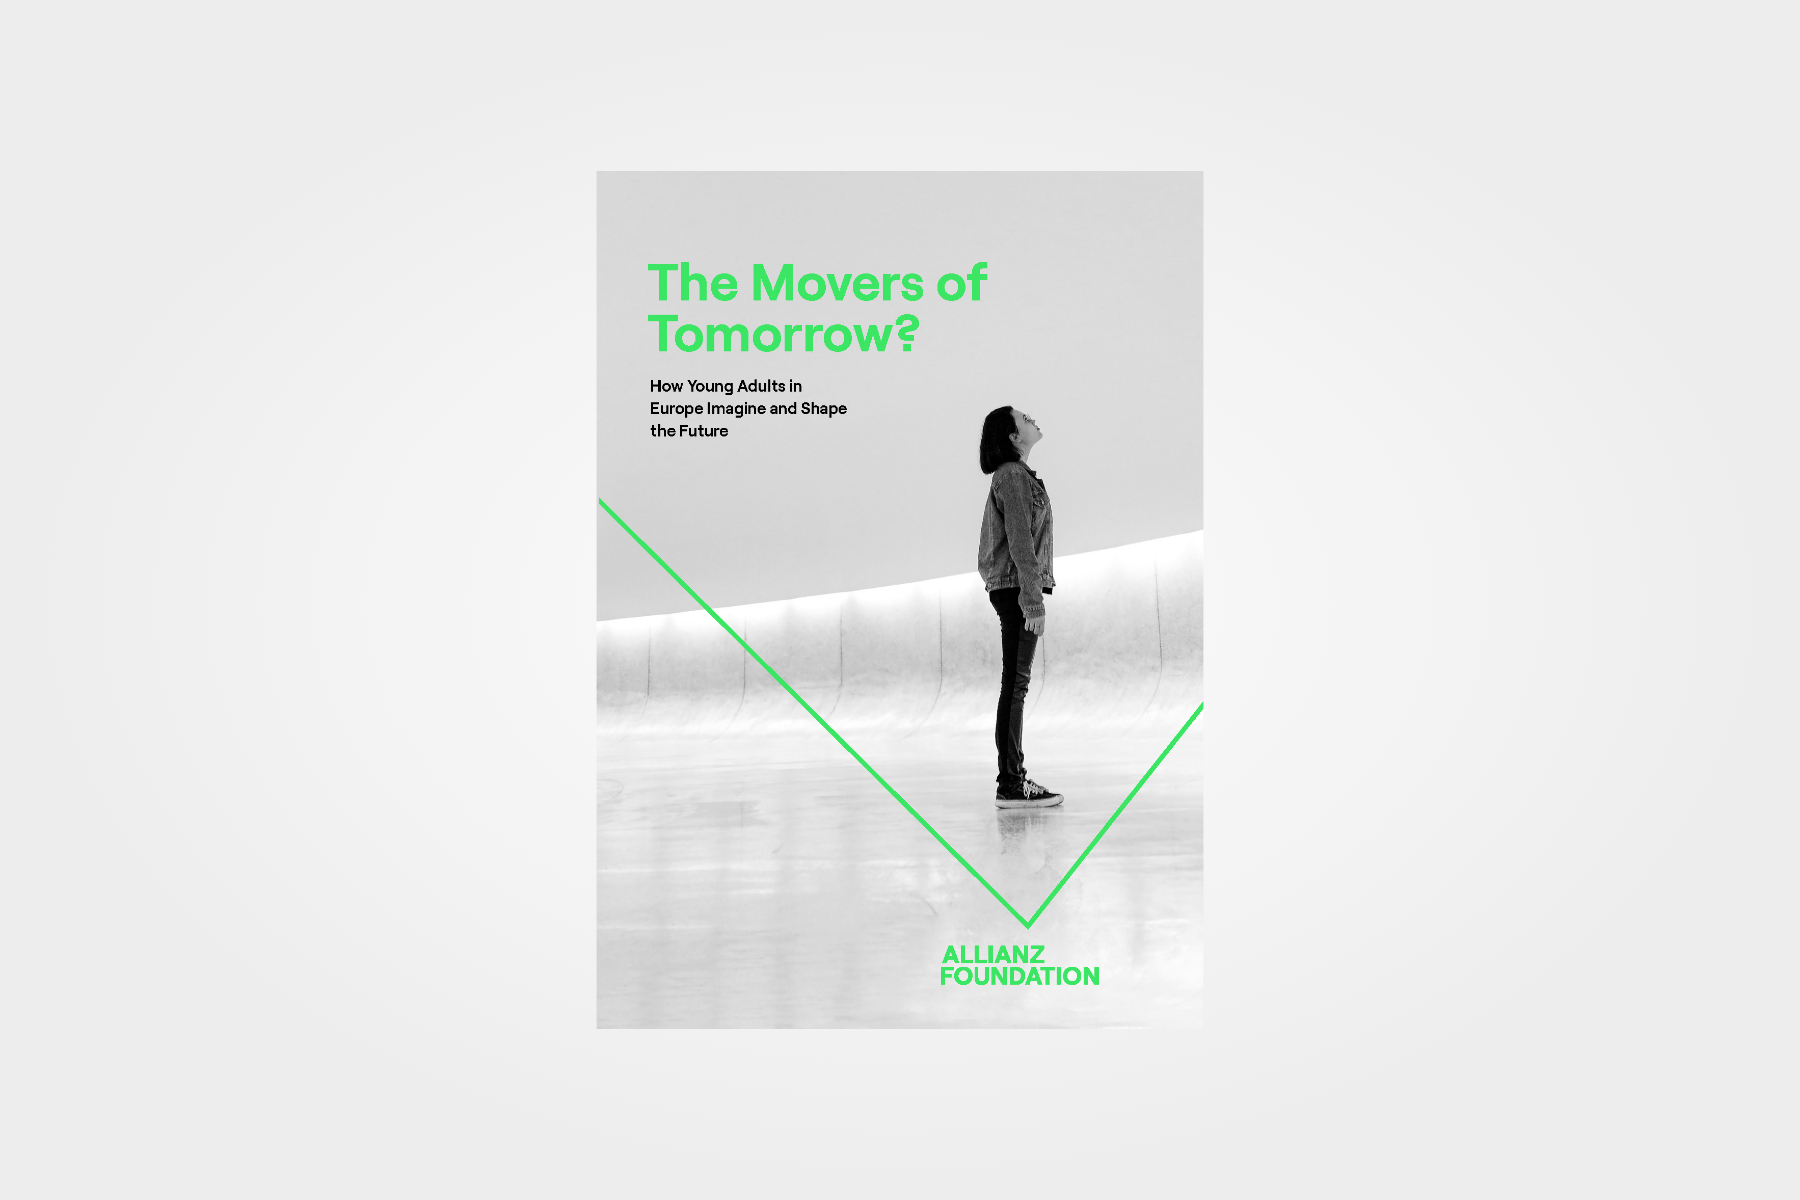 The Movers of Tomorrow? How Young Adults in Europe Imagine and Shape the Future